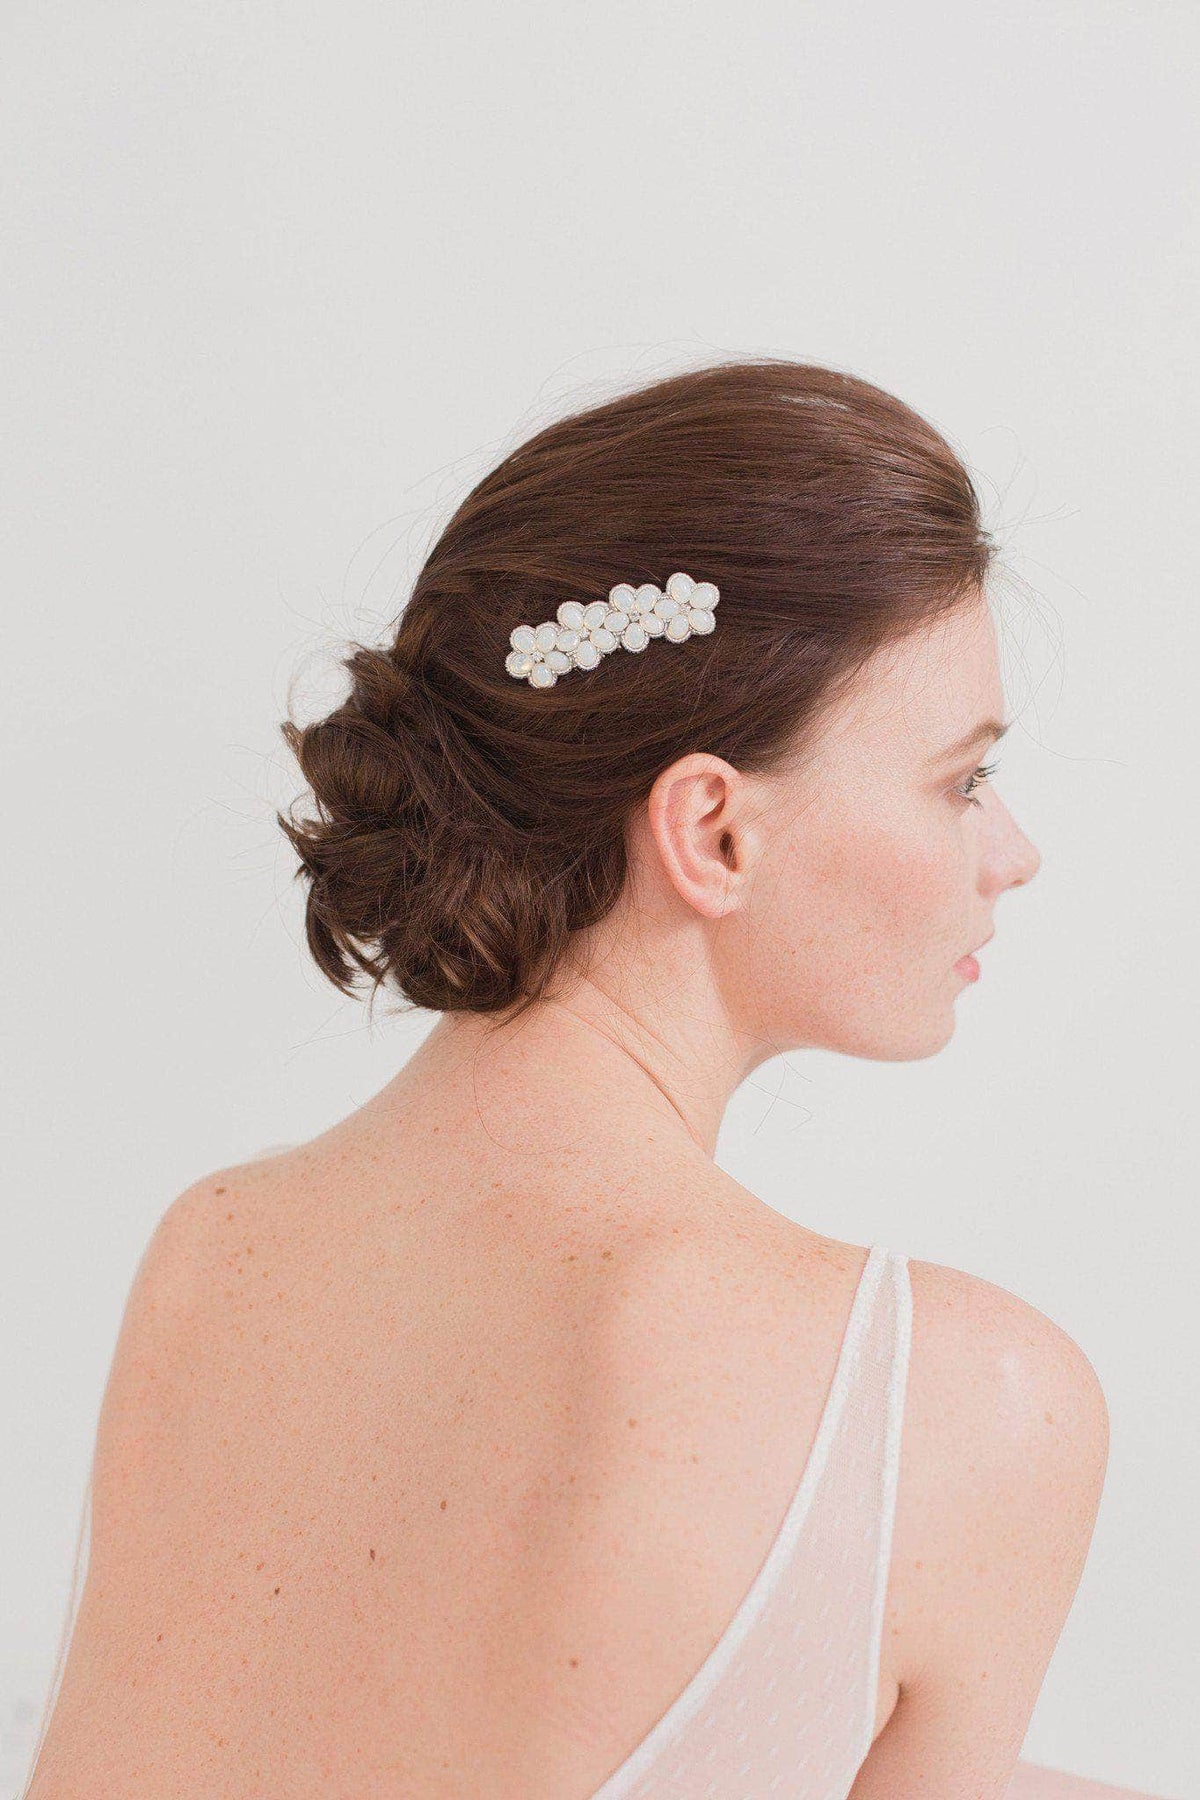 Wedding Haircomb Silver Wedding hair comb with a floral arrangement of opals and crystals - &#39;Prue&#39;